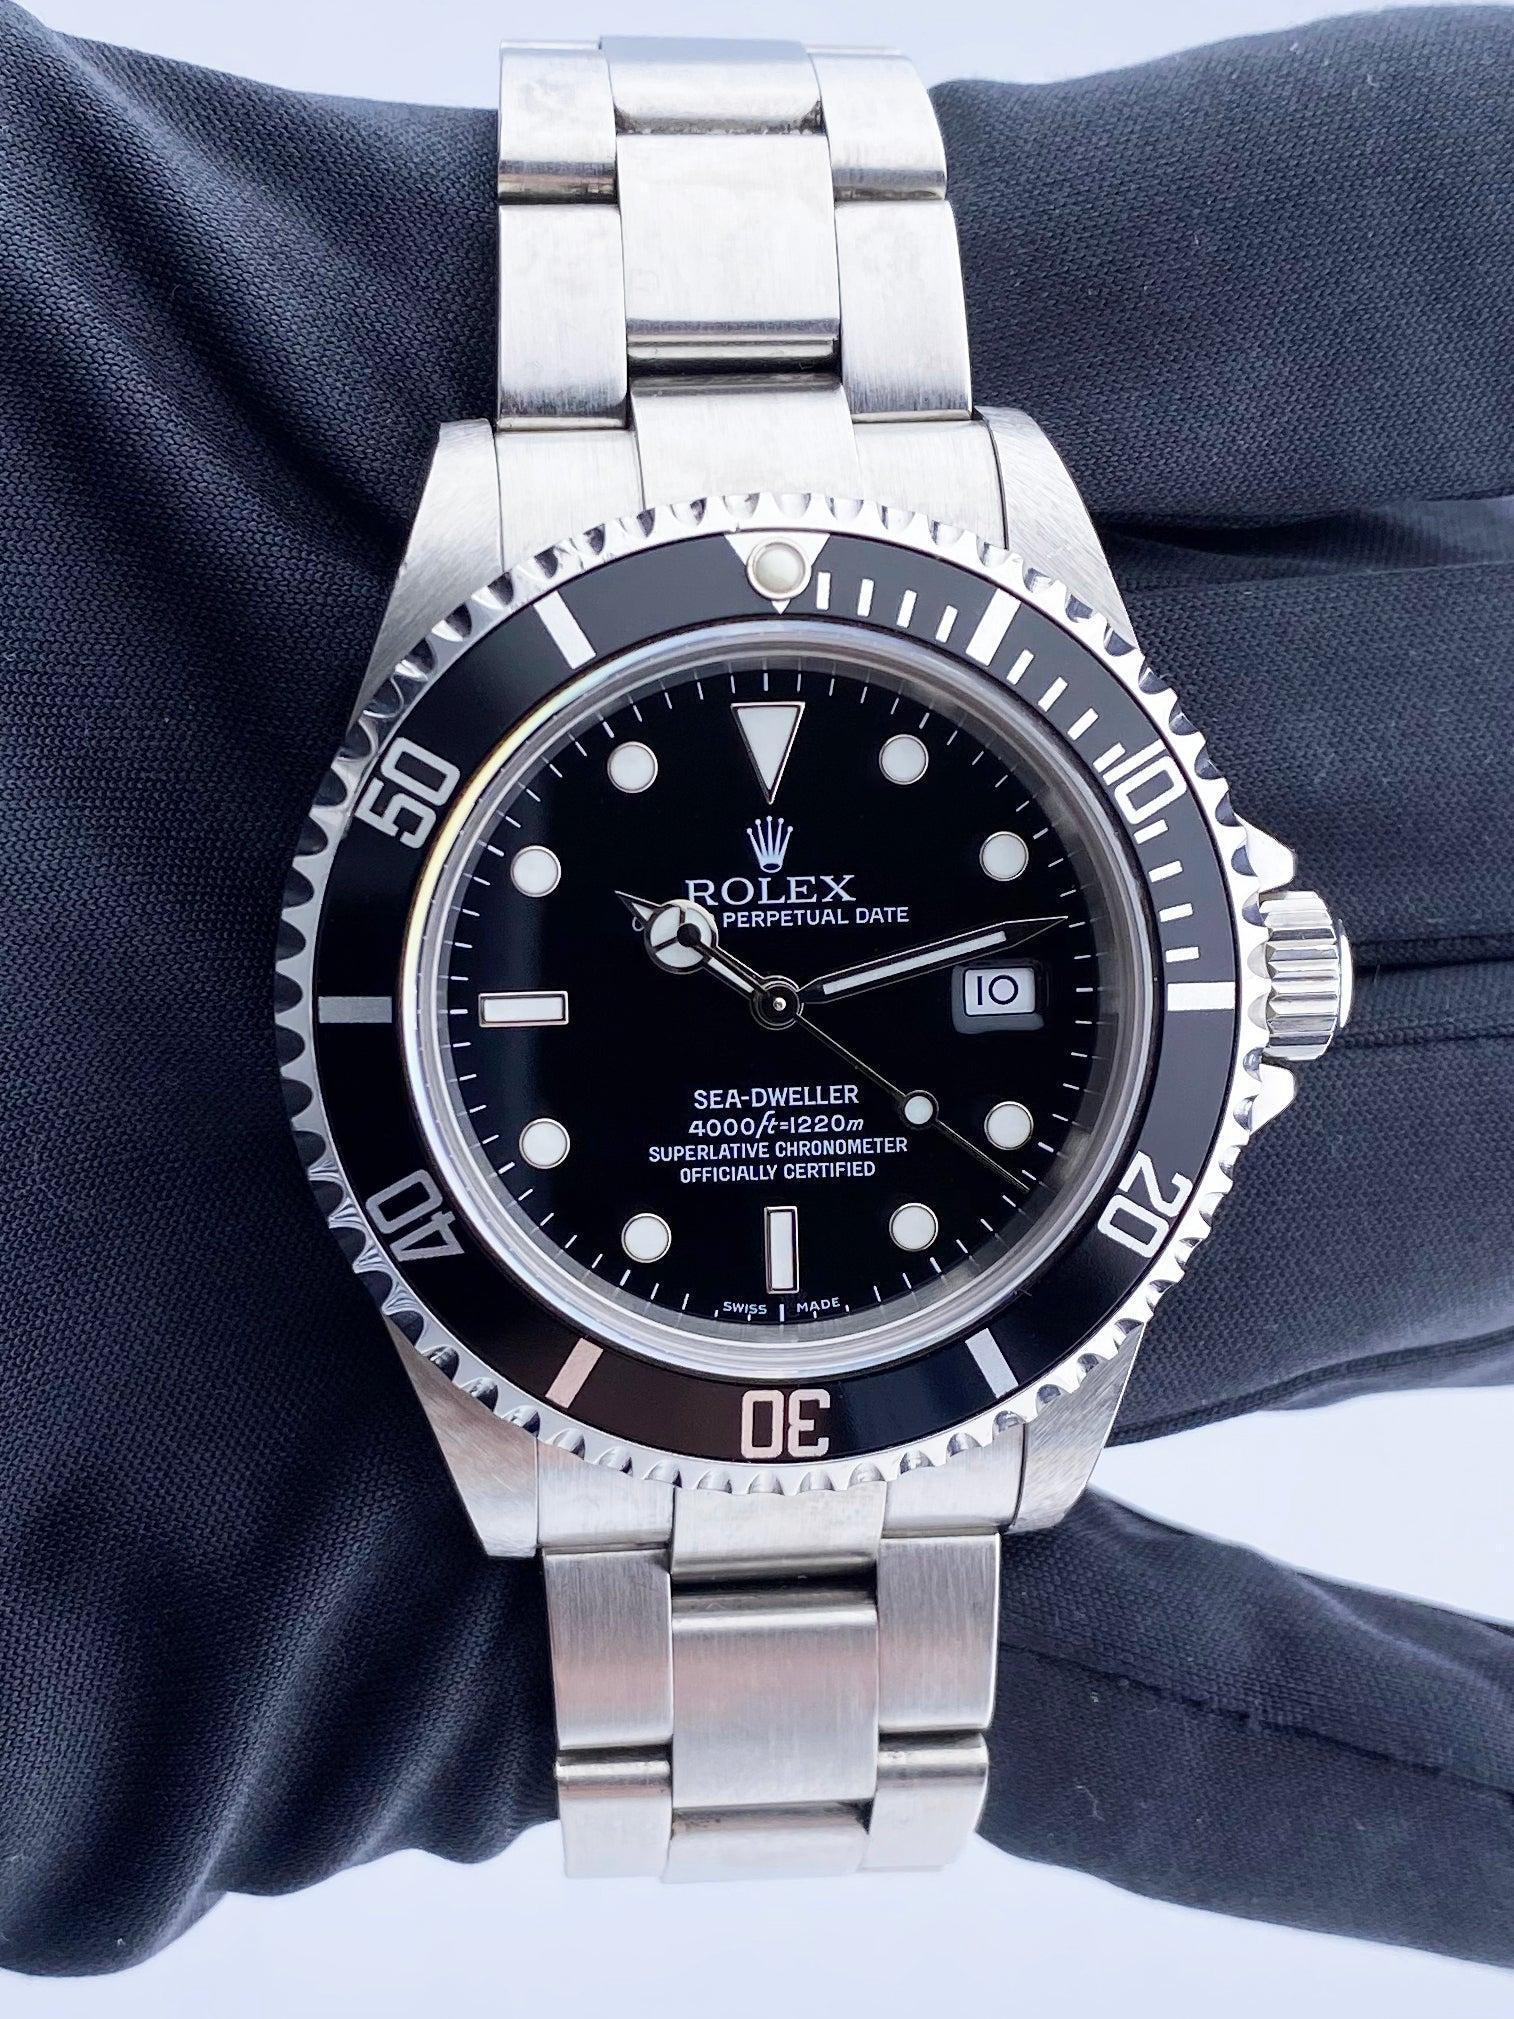 
Rolex Oyster Perpetual Sea-Dweller 16600 Mens Watch. 40mm stainless steel case. Unidirectional rotating stainless steel bezel with black bezel insert. Black dial with luminous hands and index hour marker. Minute maker on the outer dial. Date